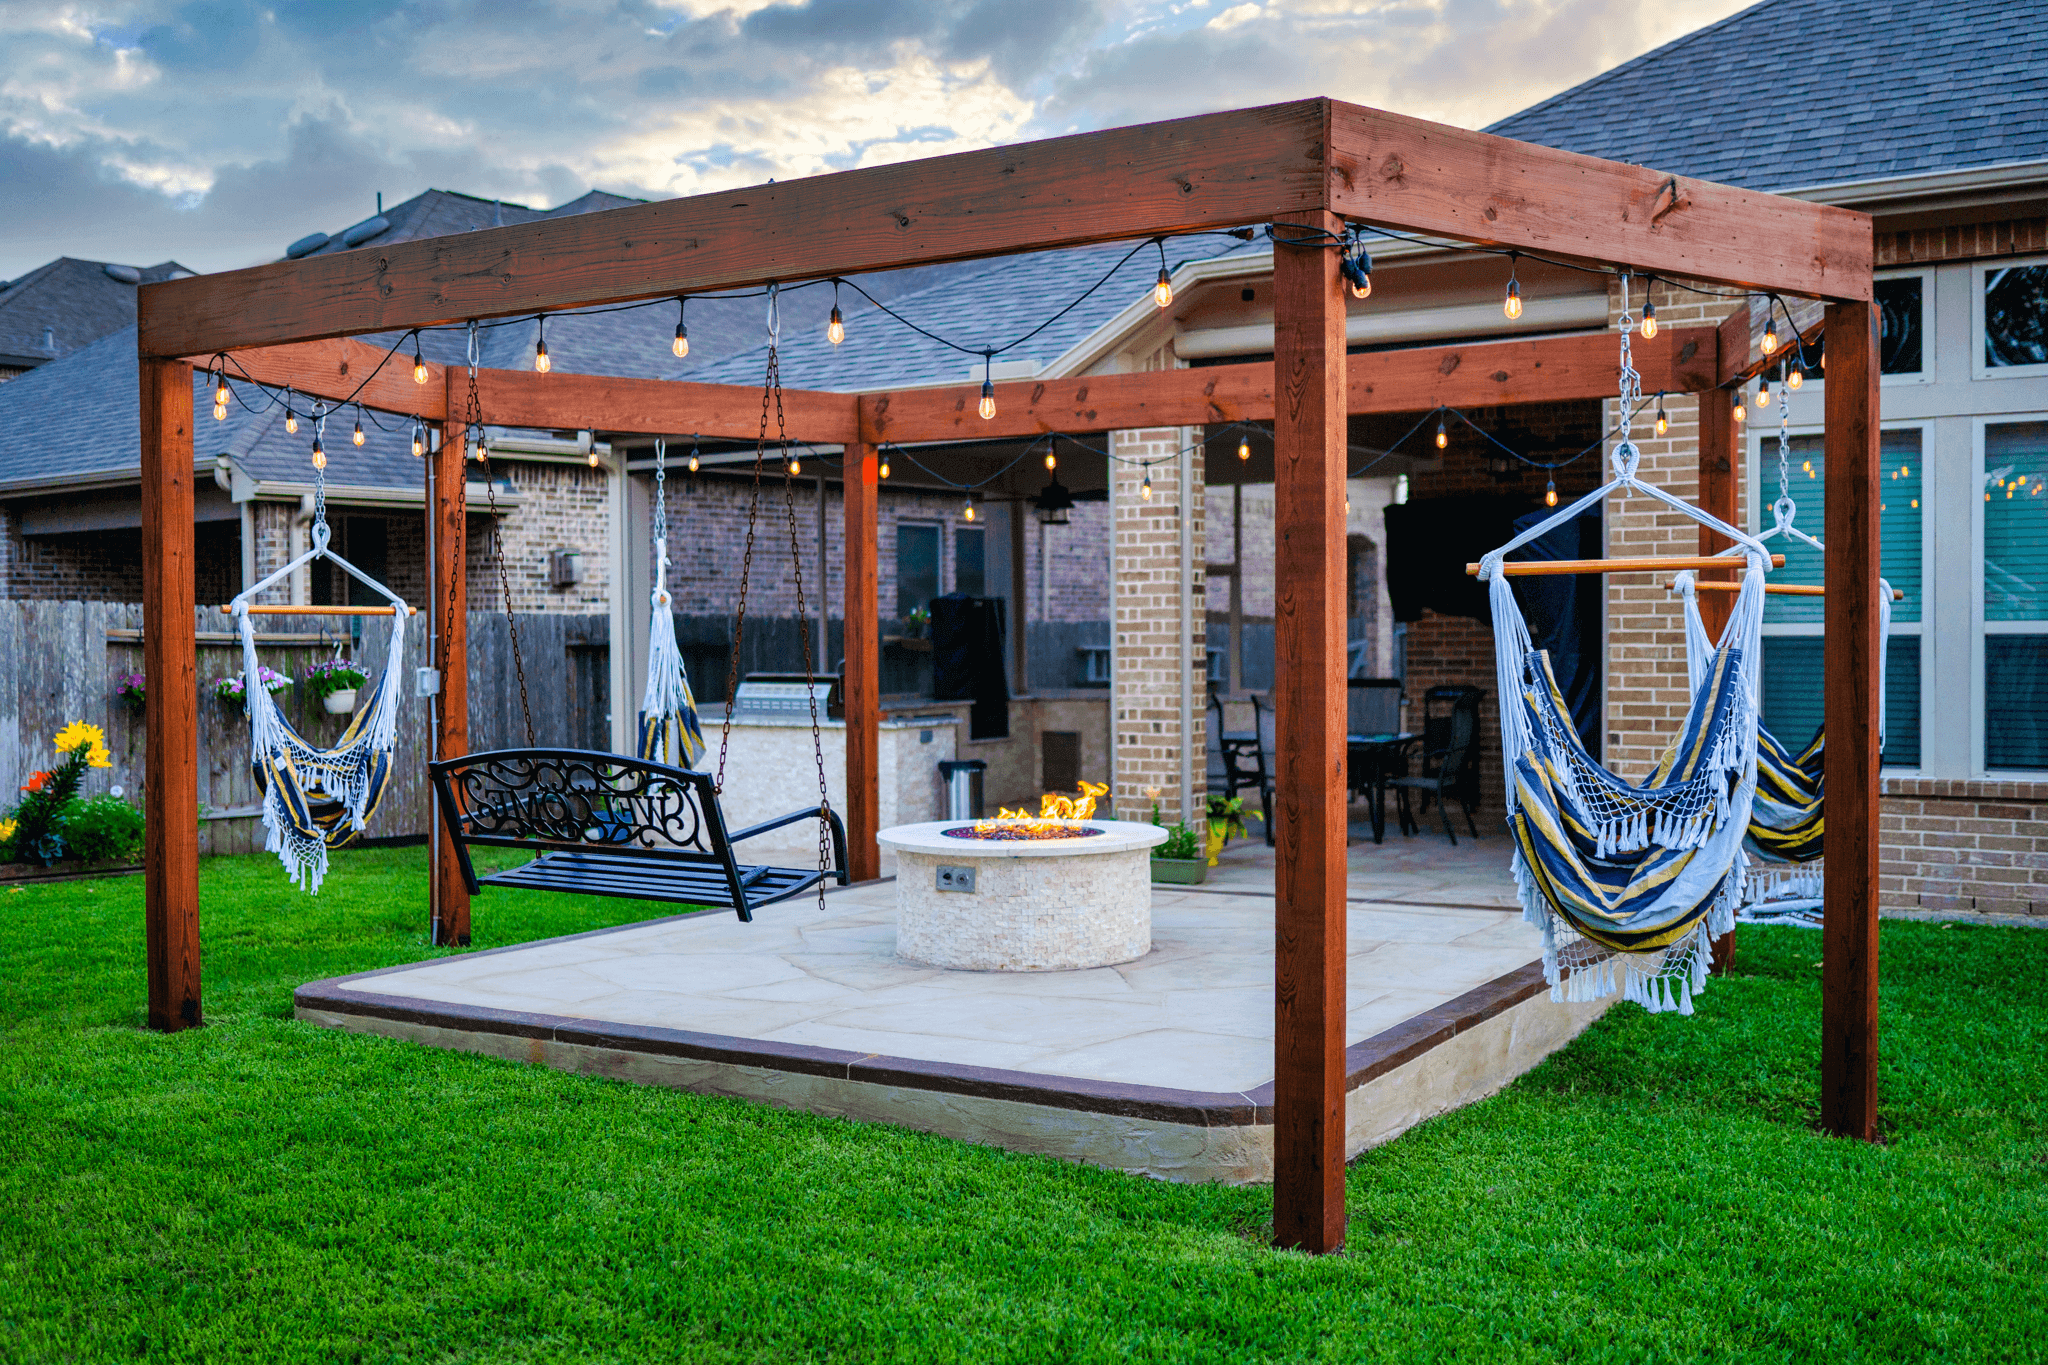 Custom built swing structure and stone detailed fire pit